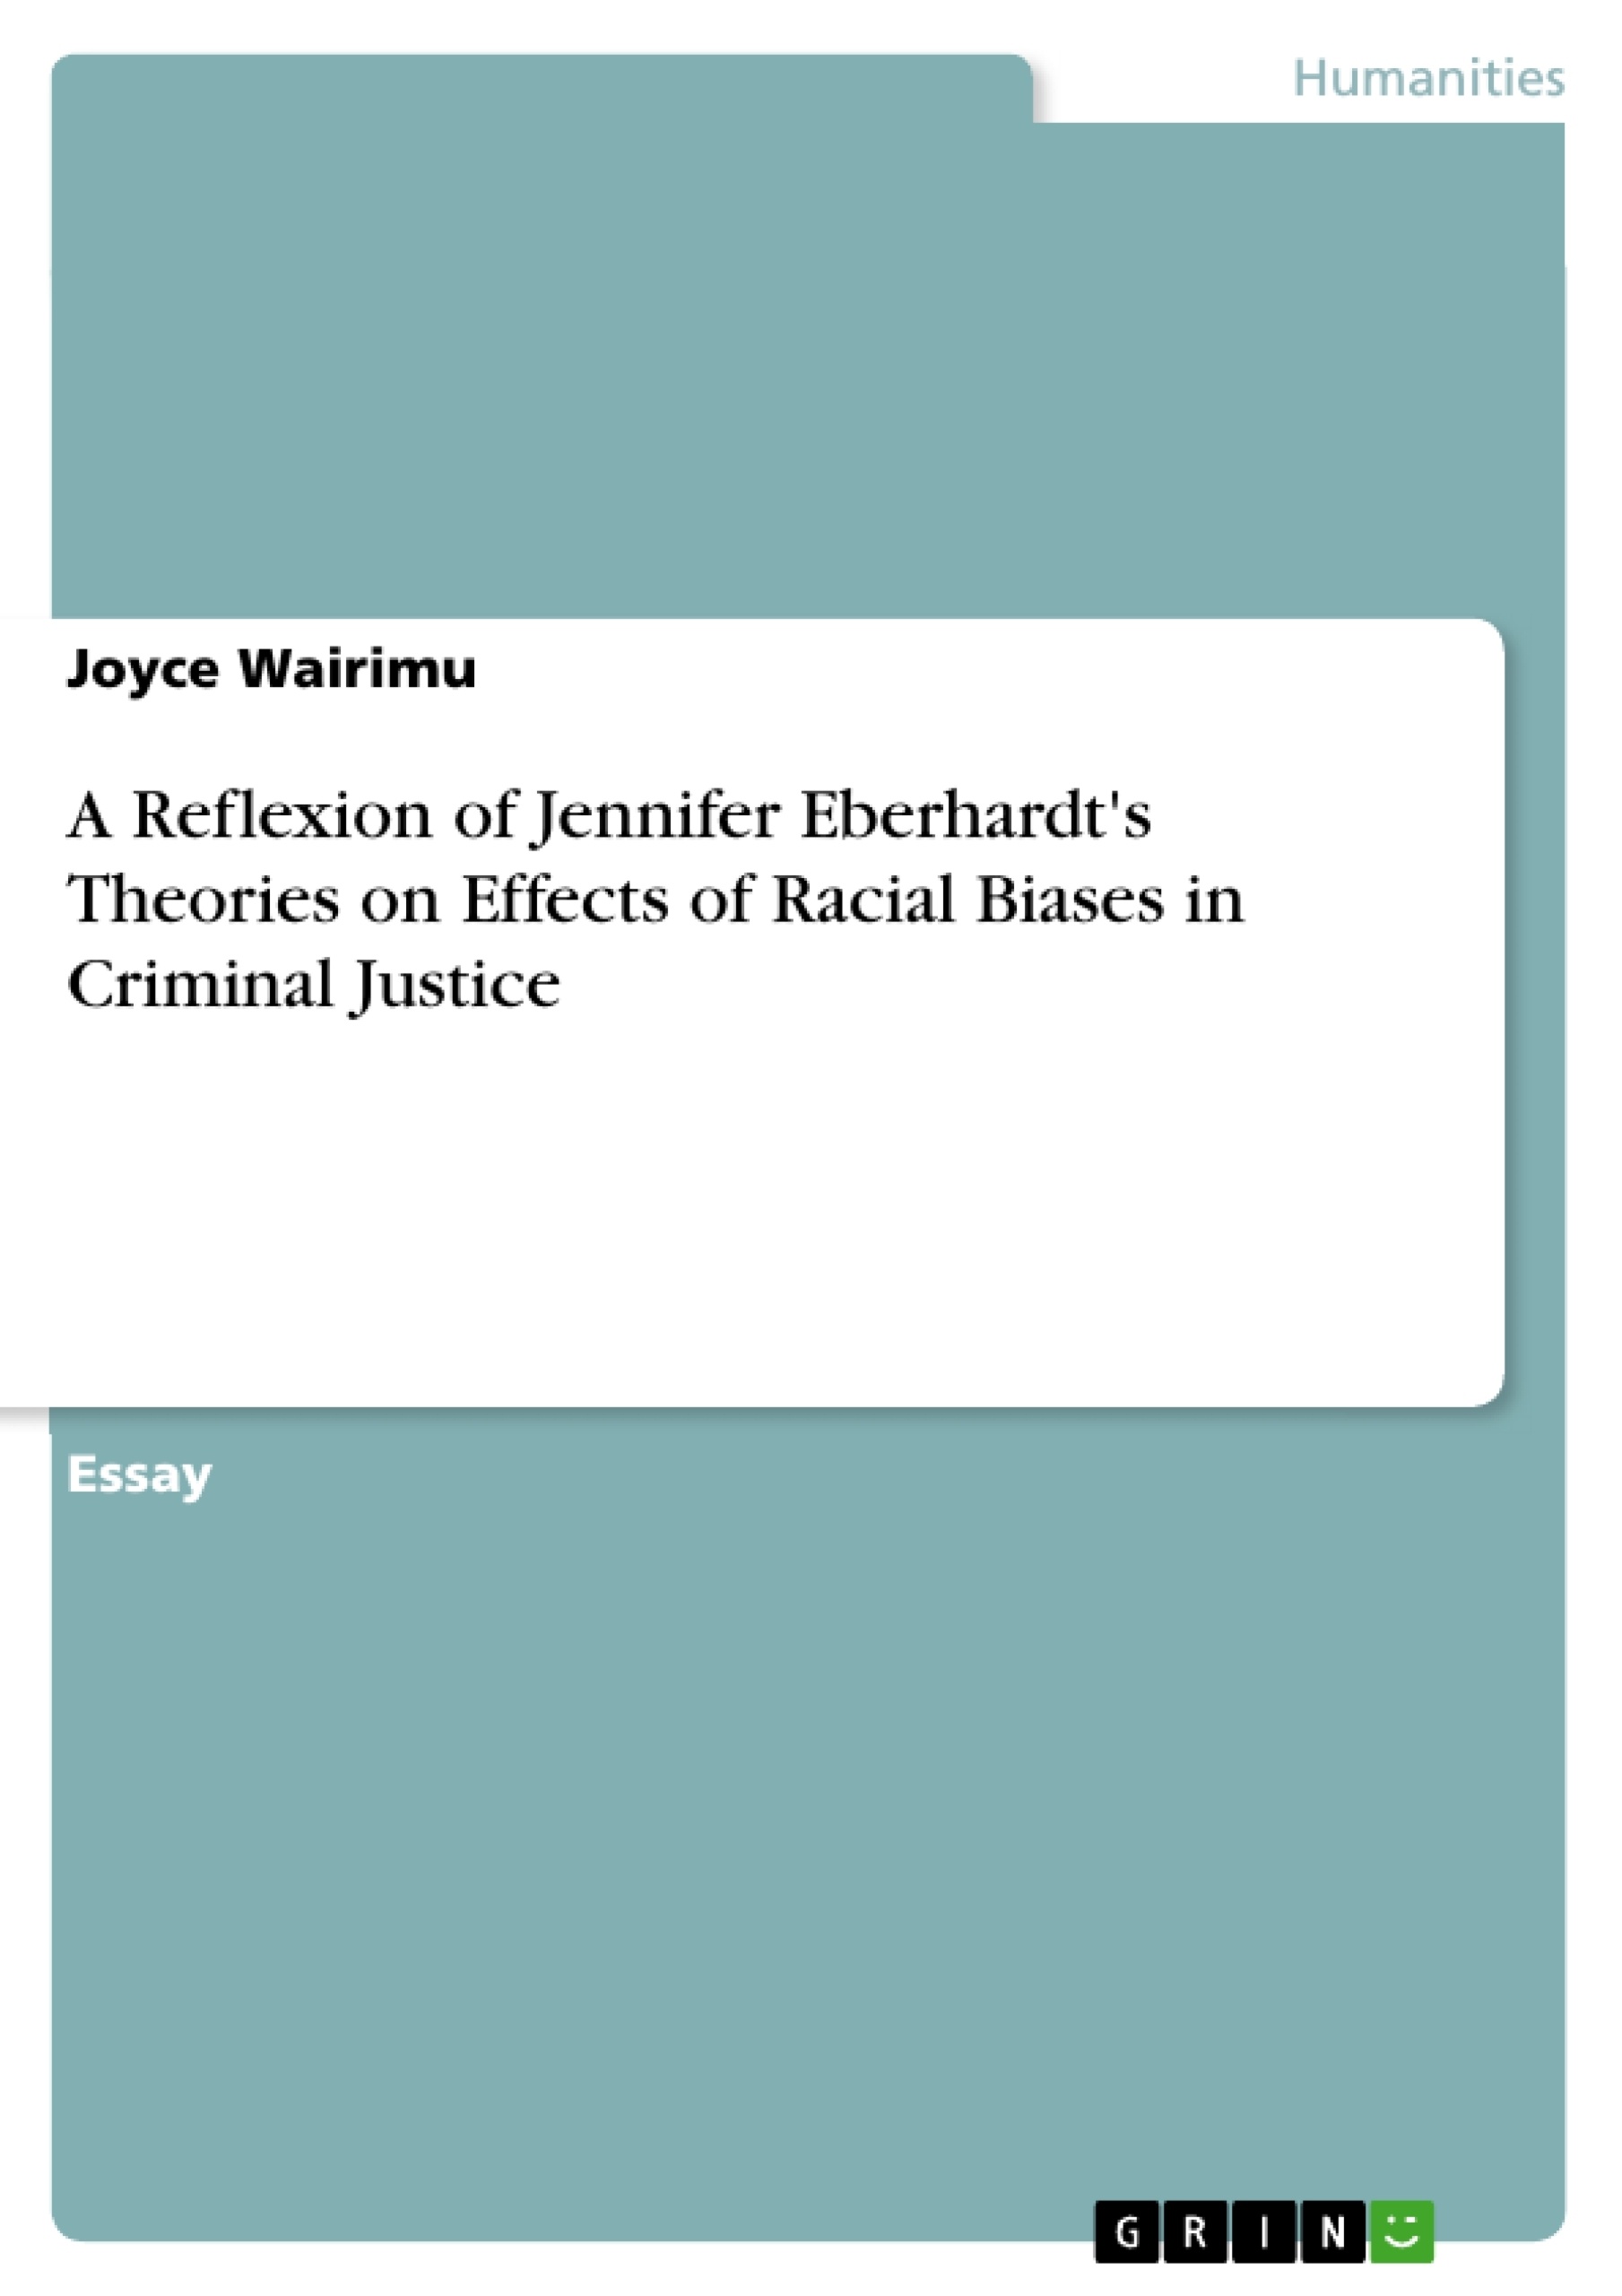 Title: A Reflexion of Jennifer Eberhardt's Theories on Effects of Racial Biases in Criminal Justice